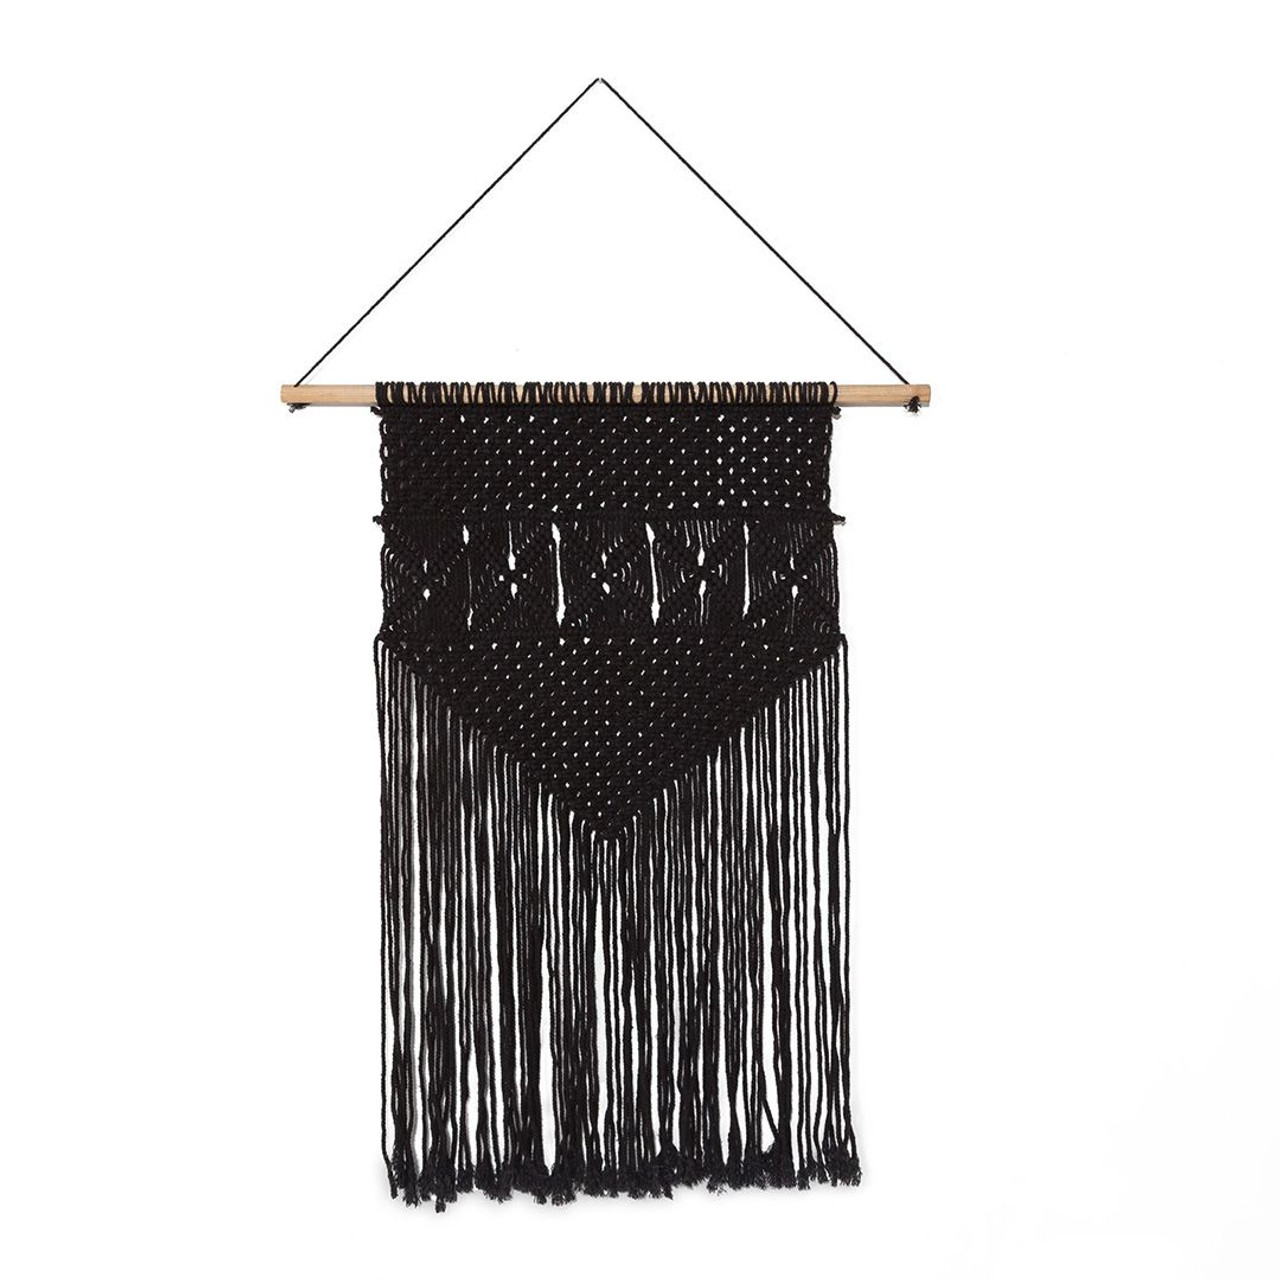 Bohemian Rio Macrame Wall Hanging - Black - Style In Form